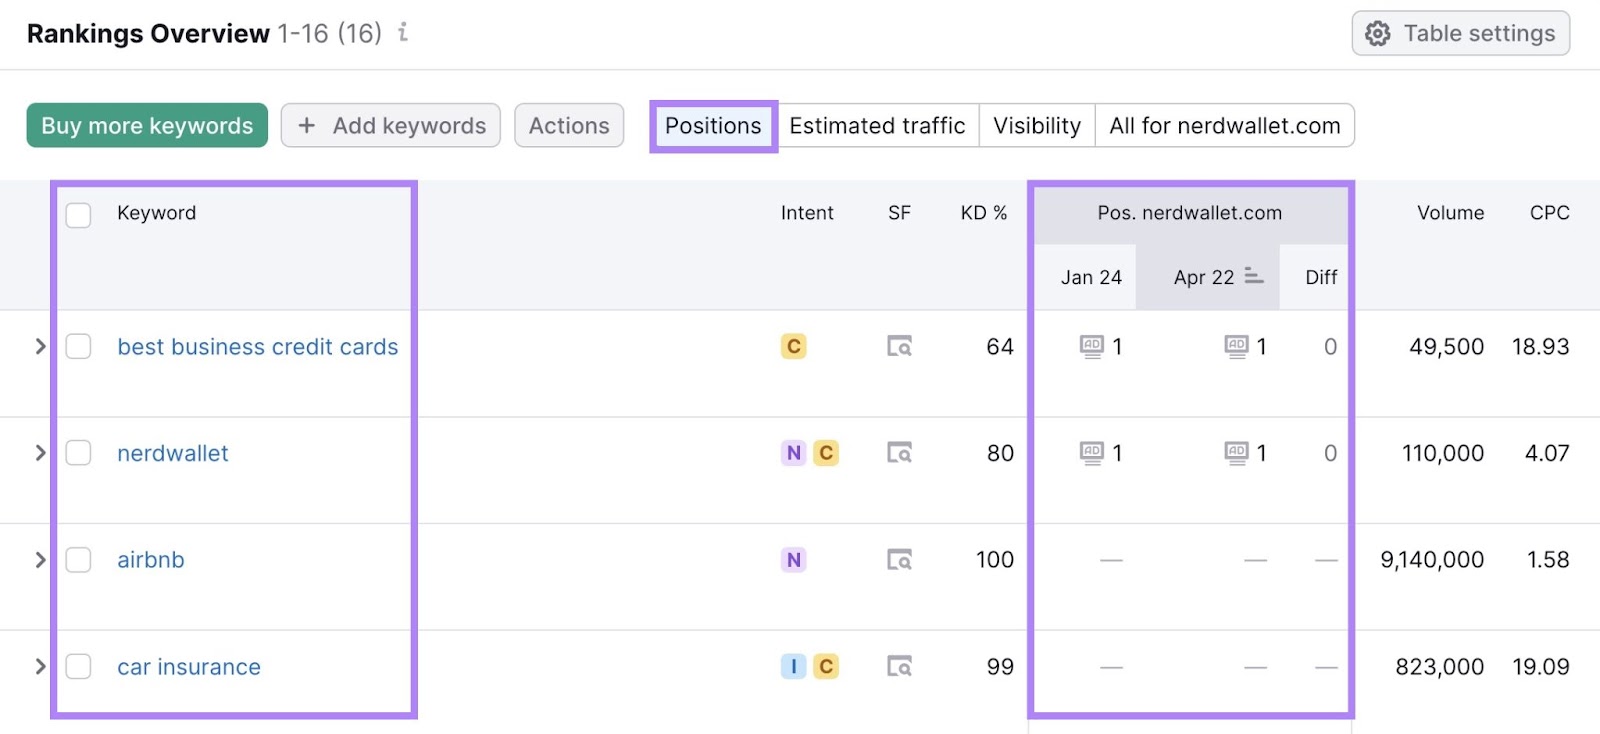 Rankings overview table in Position Tracking tool, showing which keywords your ads rank for and their position